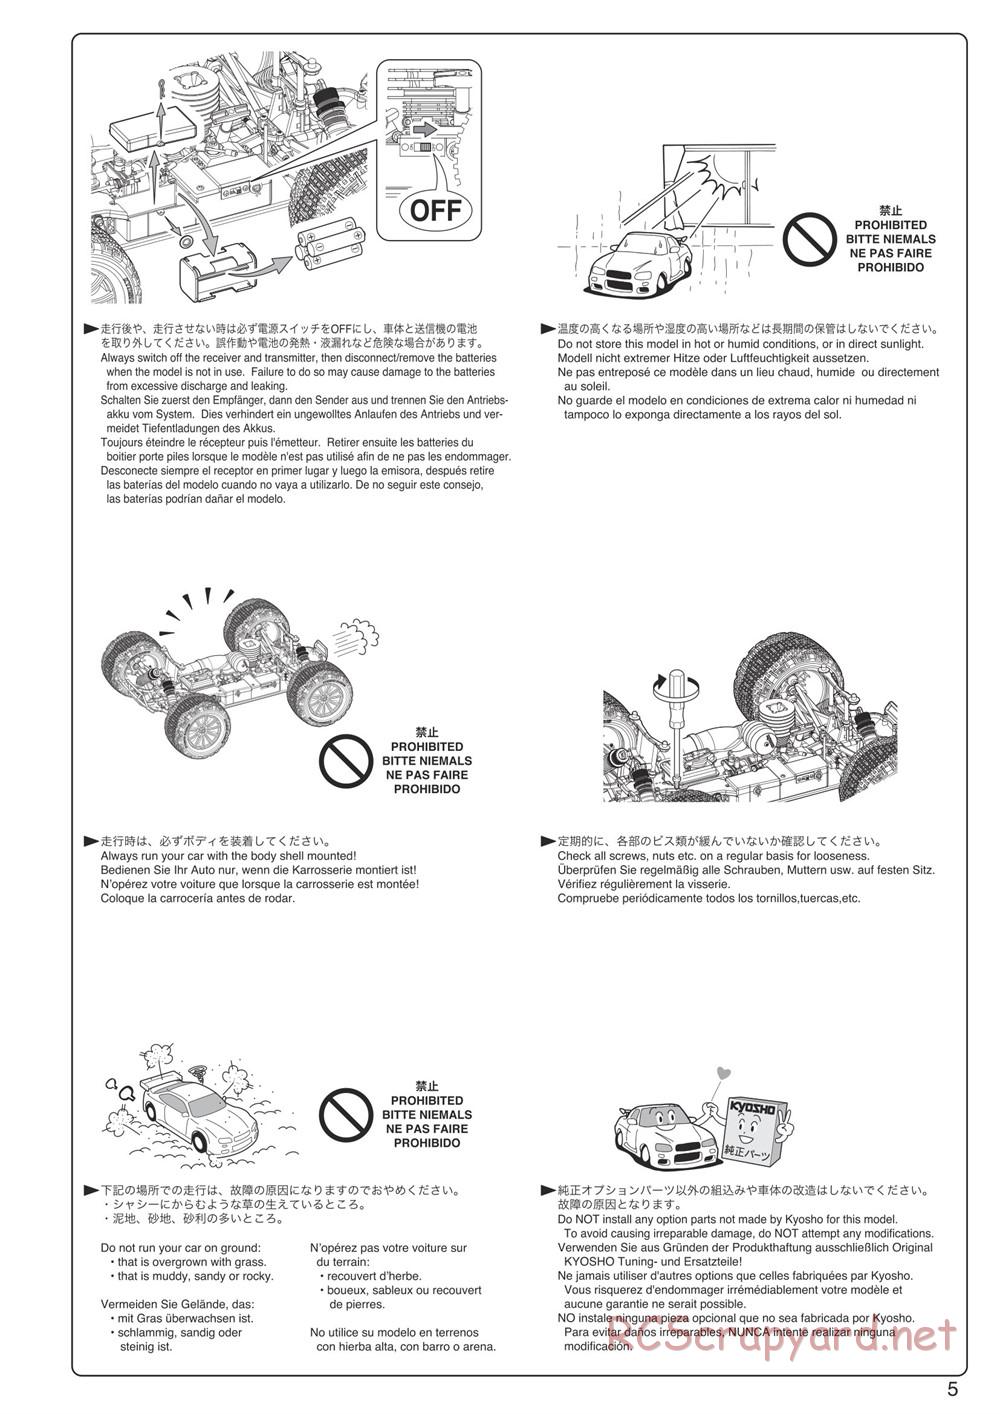 Kyosho - DMT - Manual - Page 5